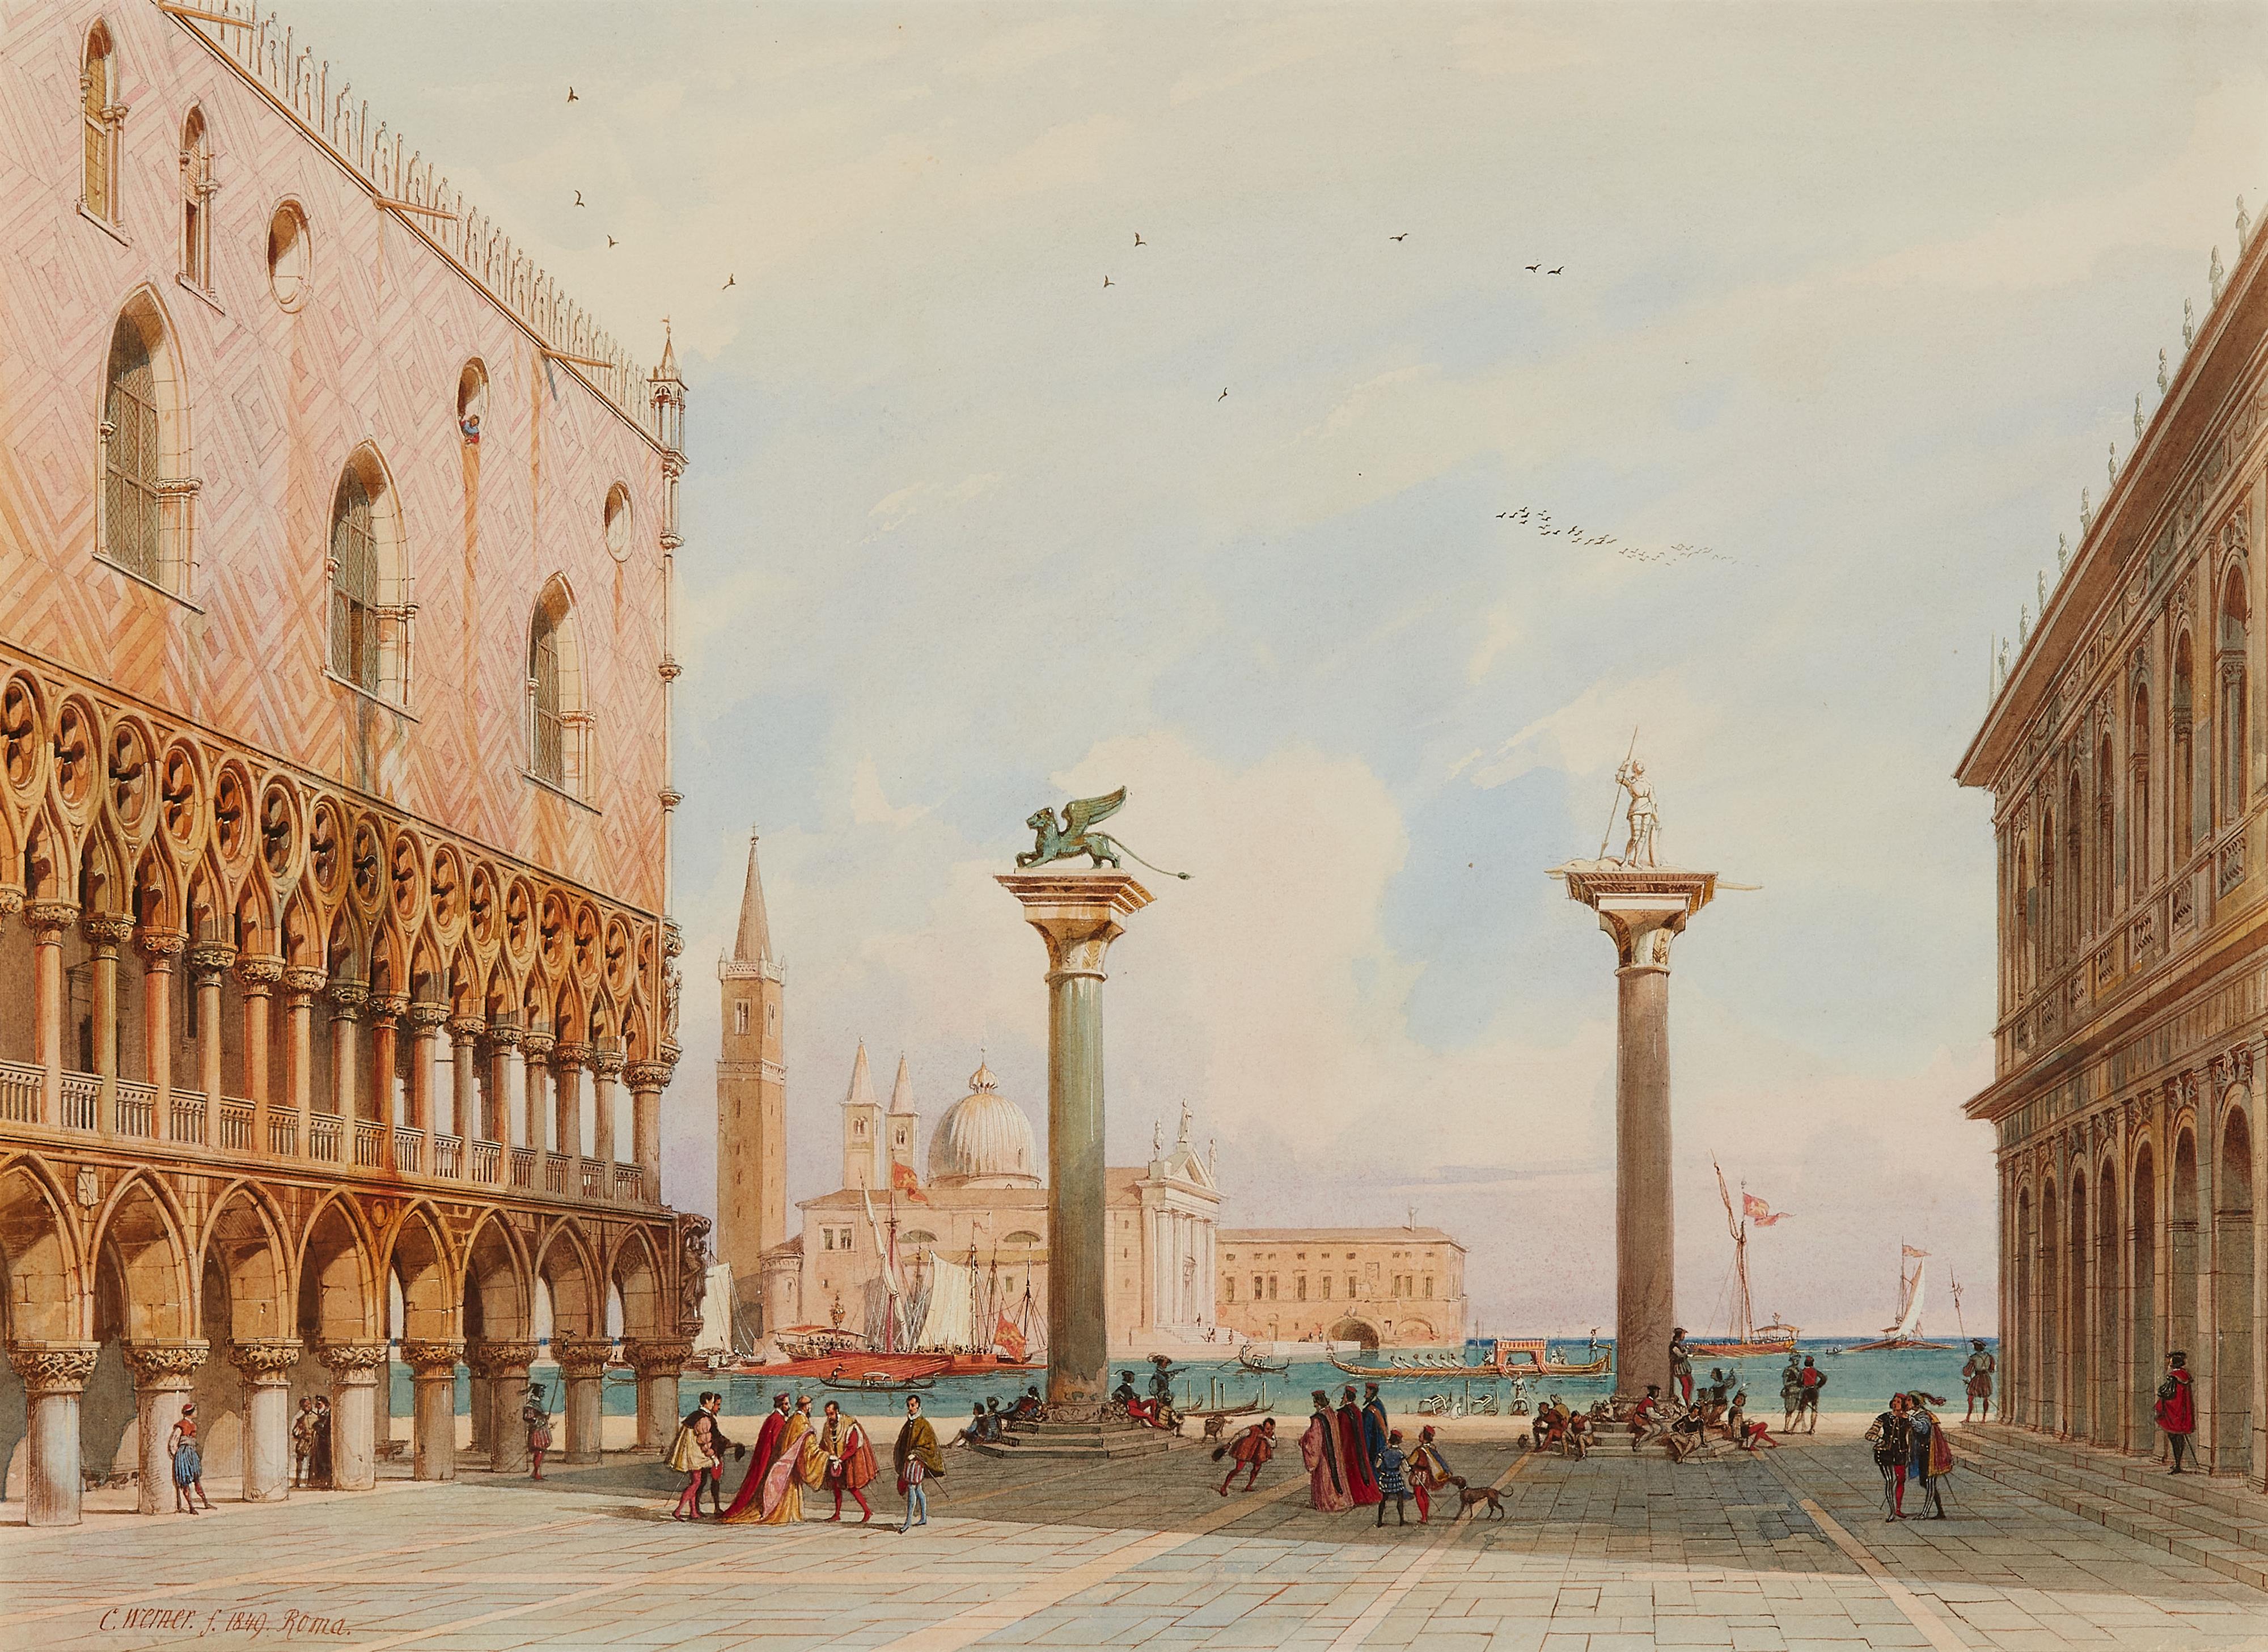 Carl Friedrich Heinrich Werner - View of the Piazzetta in Venice with the Doge's Palace and Il Redentore - image-1